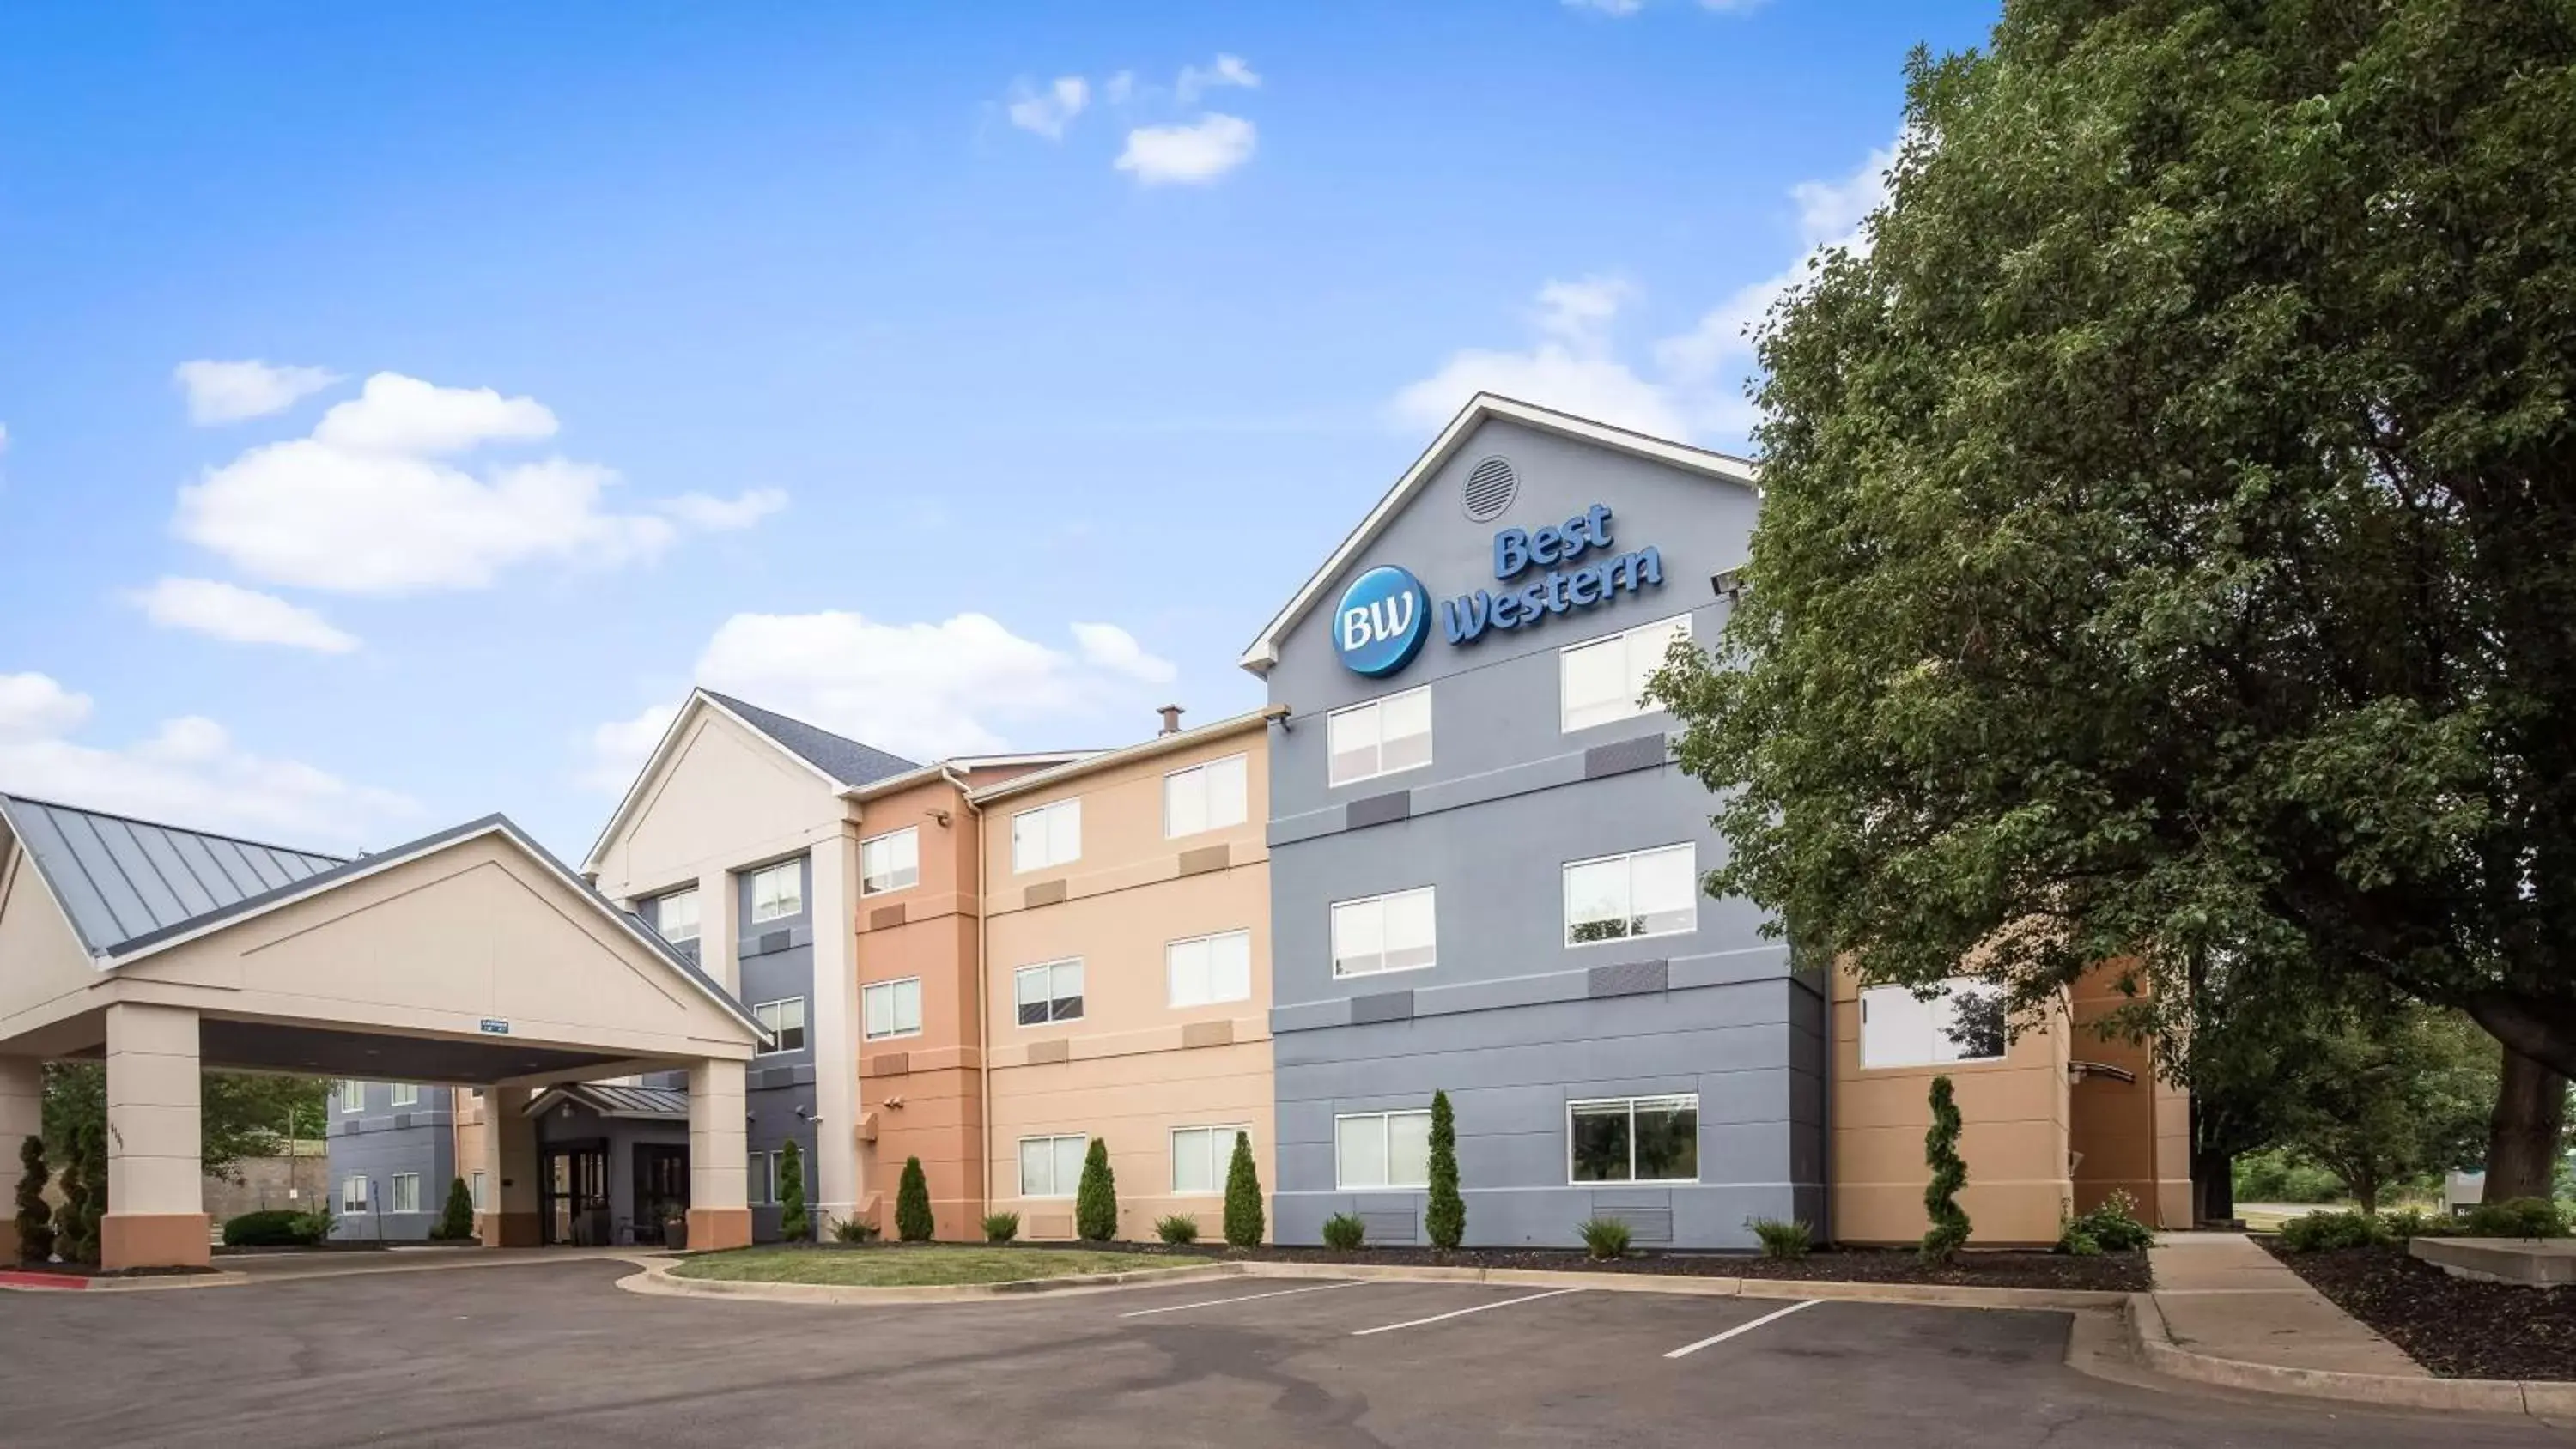 Property Building in Best Western Independence Kansas City